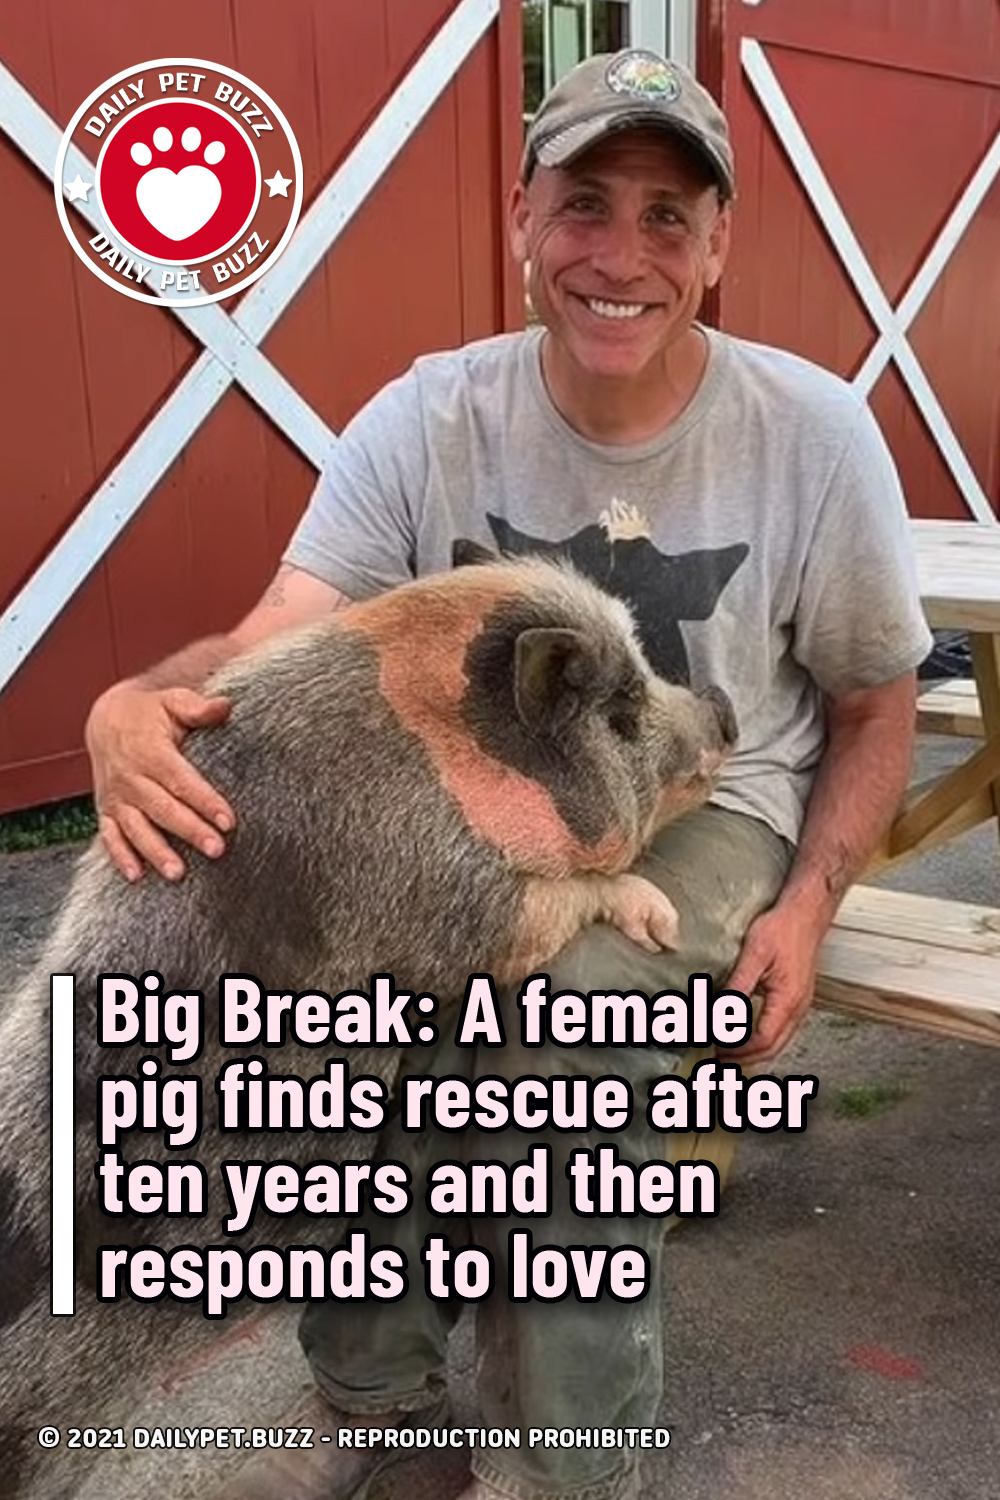 Big Break: A female pig finds rescue after ten years and then responds to love